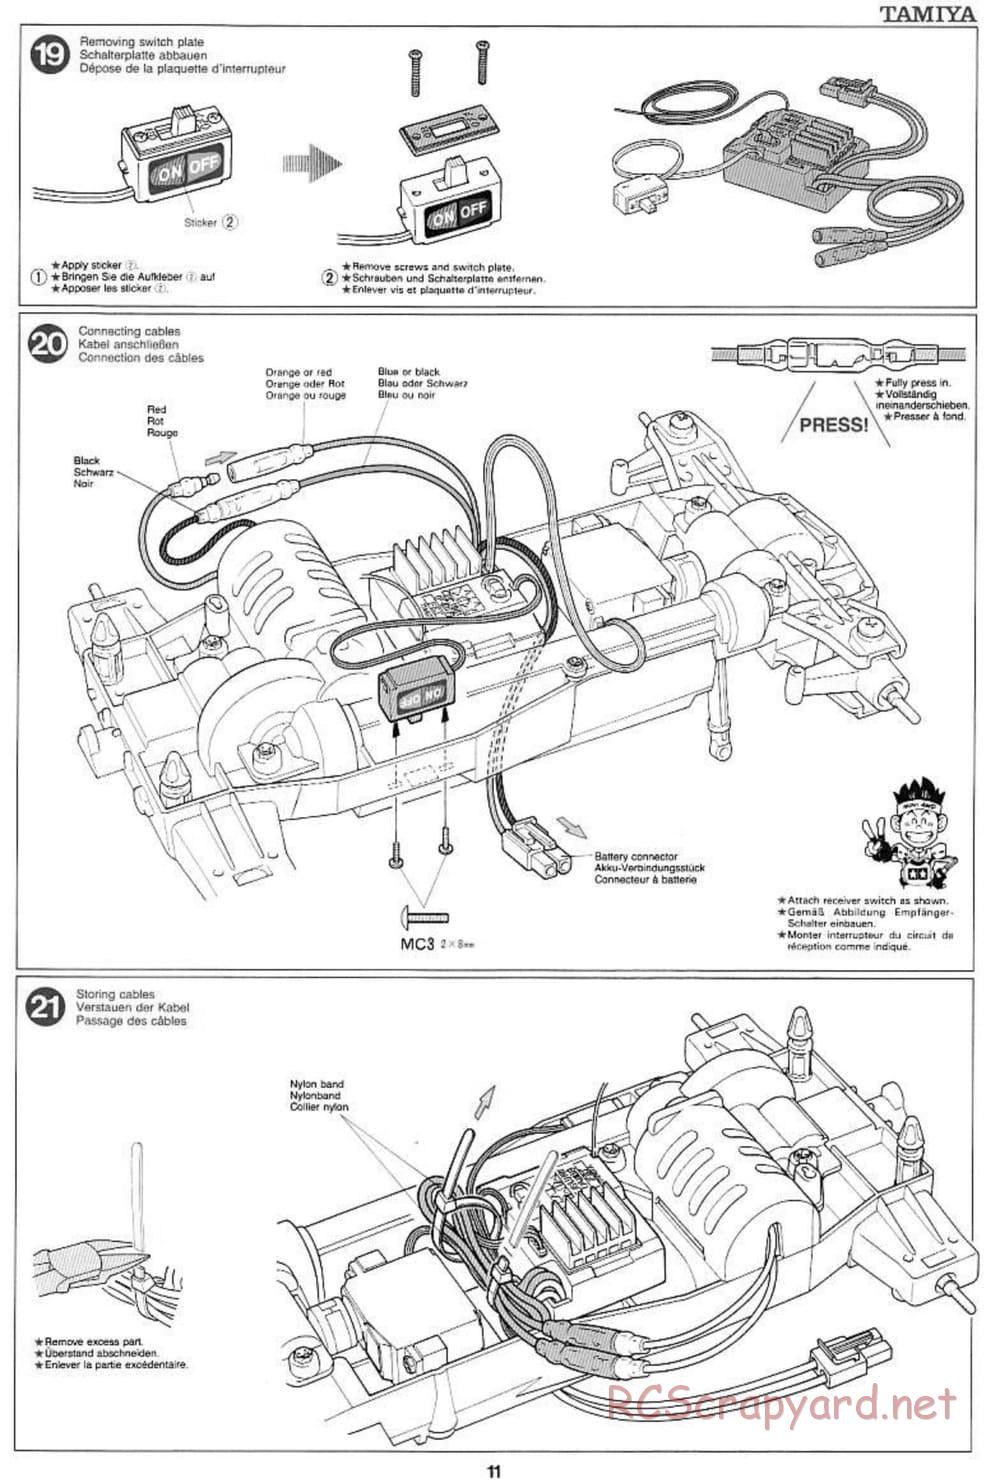 Tamiya - Wild Ceptor - Boy's 4WD Chassis - Manual - Page 11